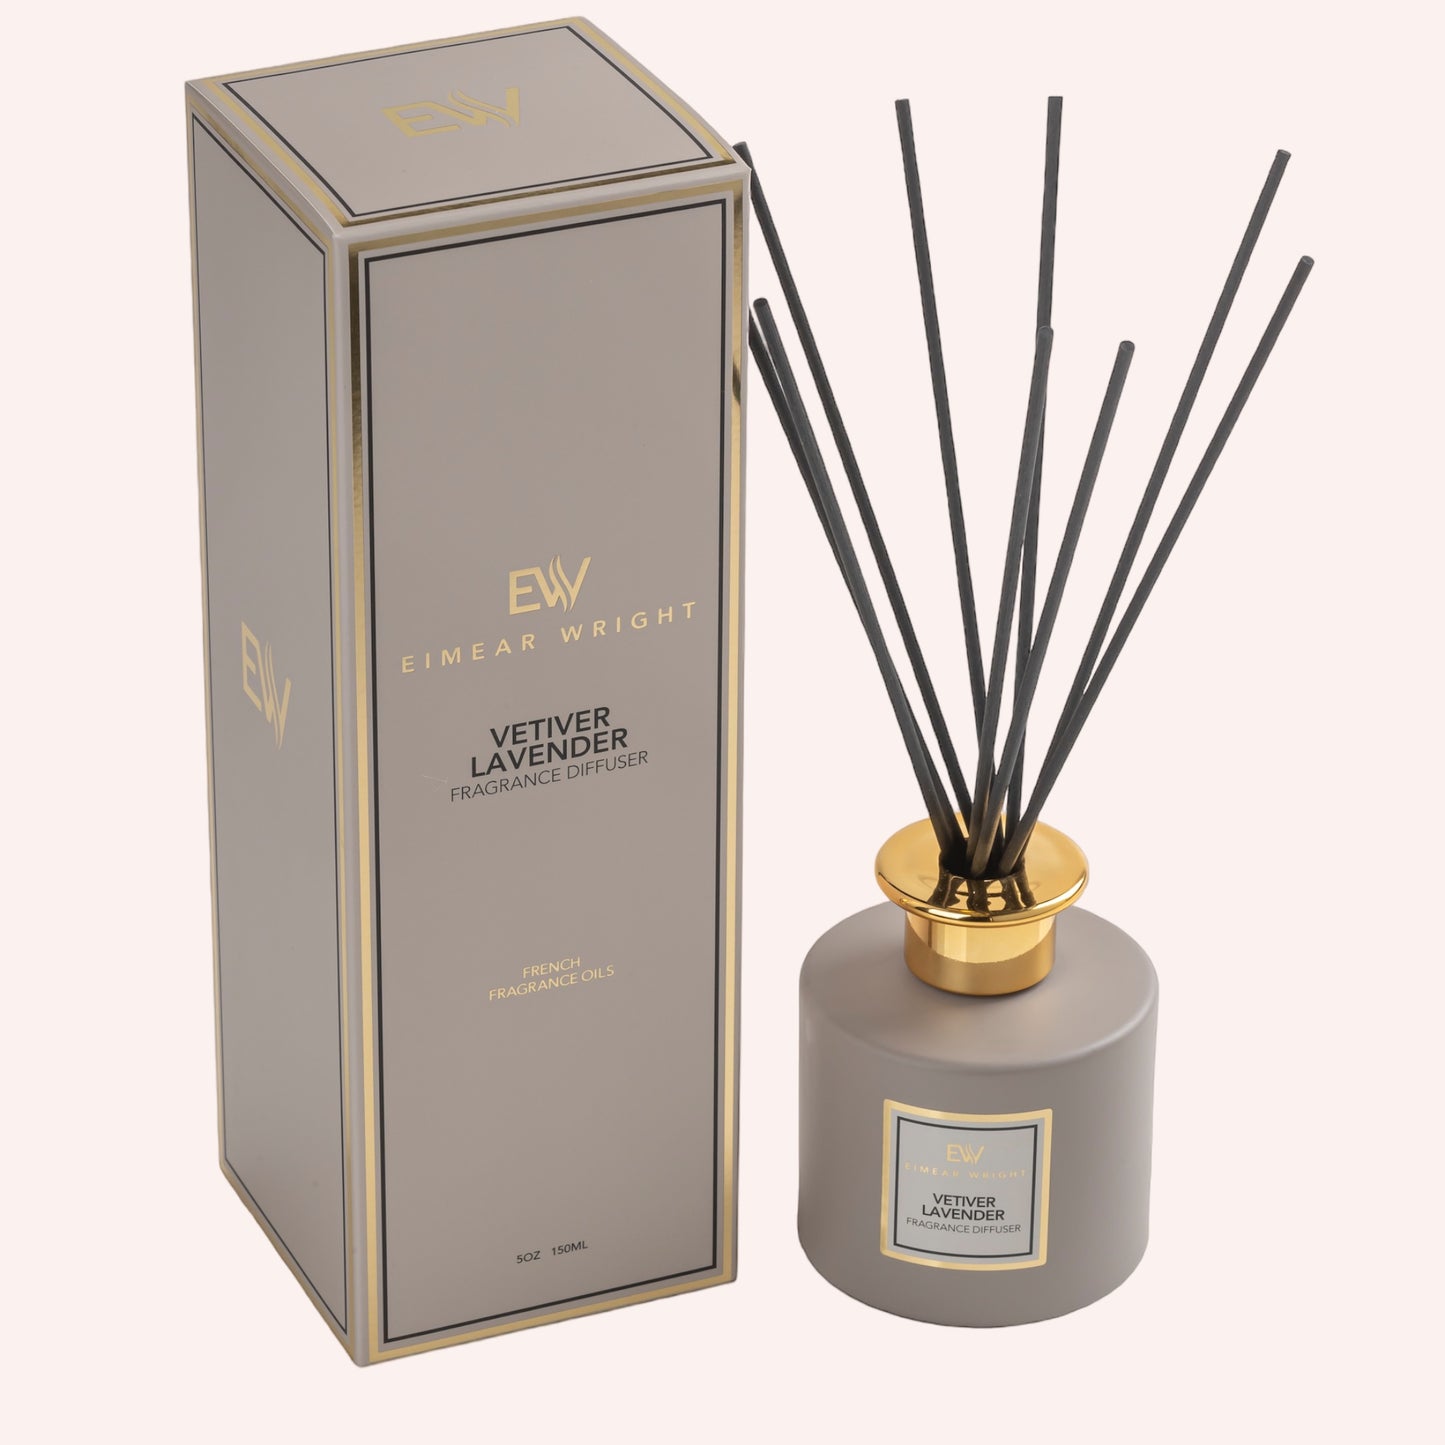 Eimear Wright Vetiver Lavender Fragrance Diffusers